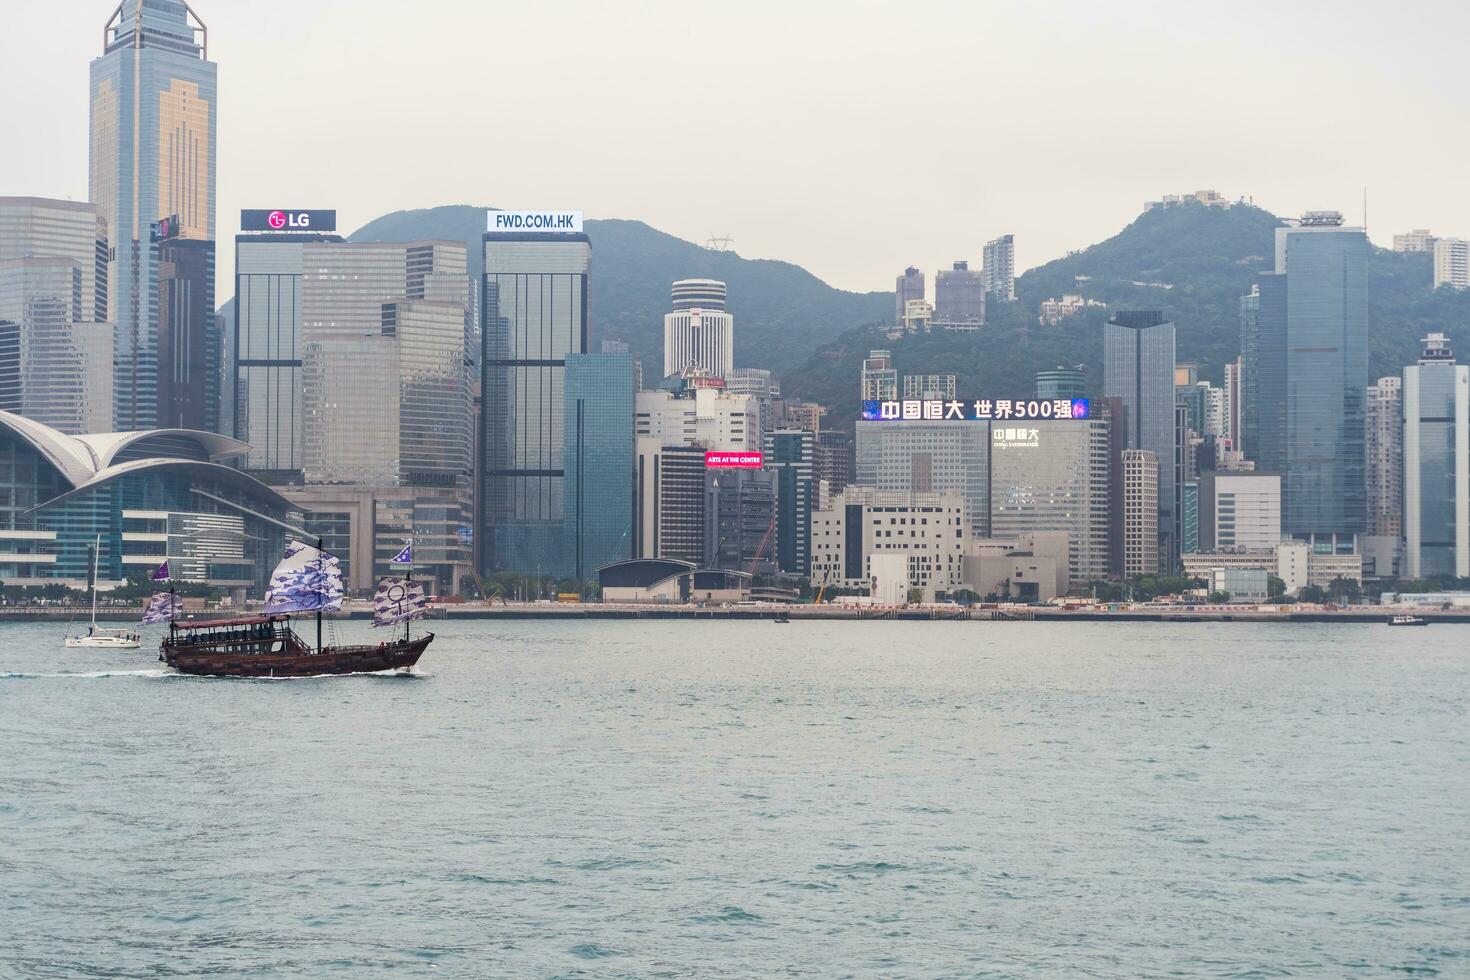 Hong Kong,March 25,2019-View of the Hong Kong skyscrapers and traditional boat from the Avenue of star on  the Victoria Harbour during a cloudy day photo